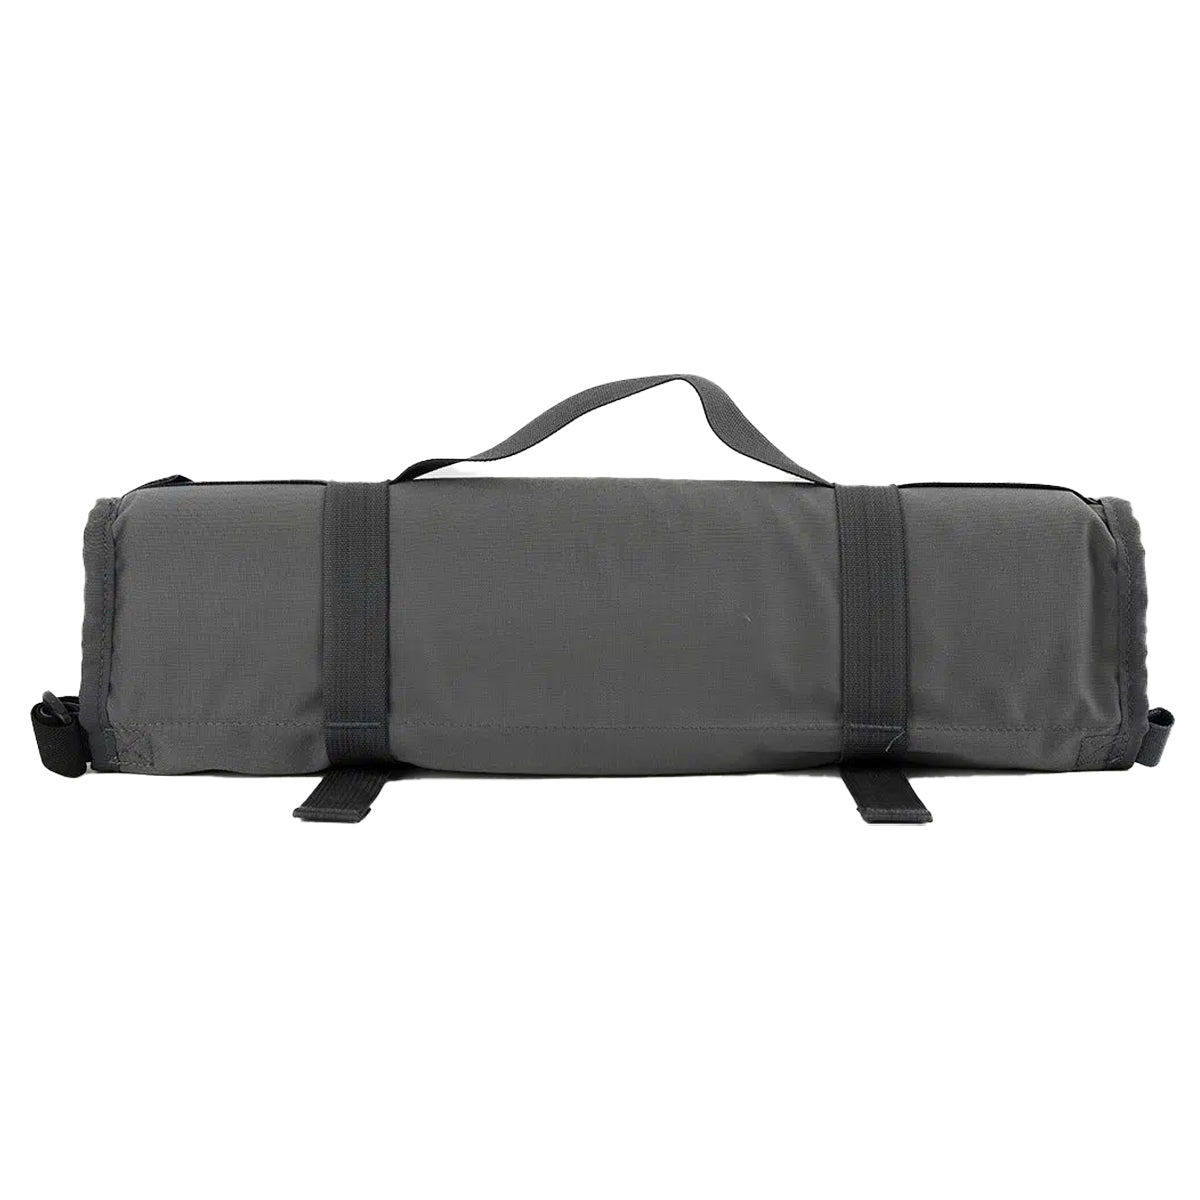 StHealthy Hunter 2-Piece Rifle Cover in Grey by GOHUNT | StHealthy Hunter - GOHUNT Shop